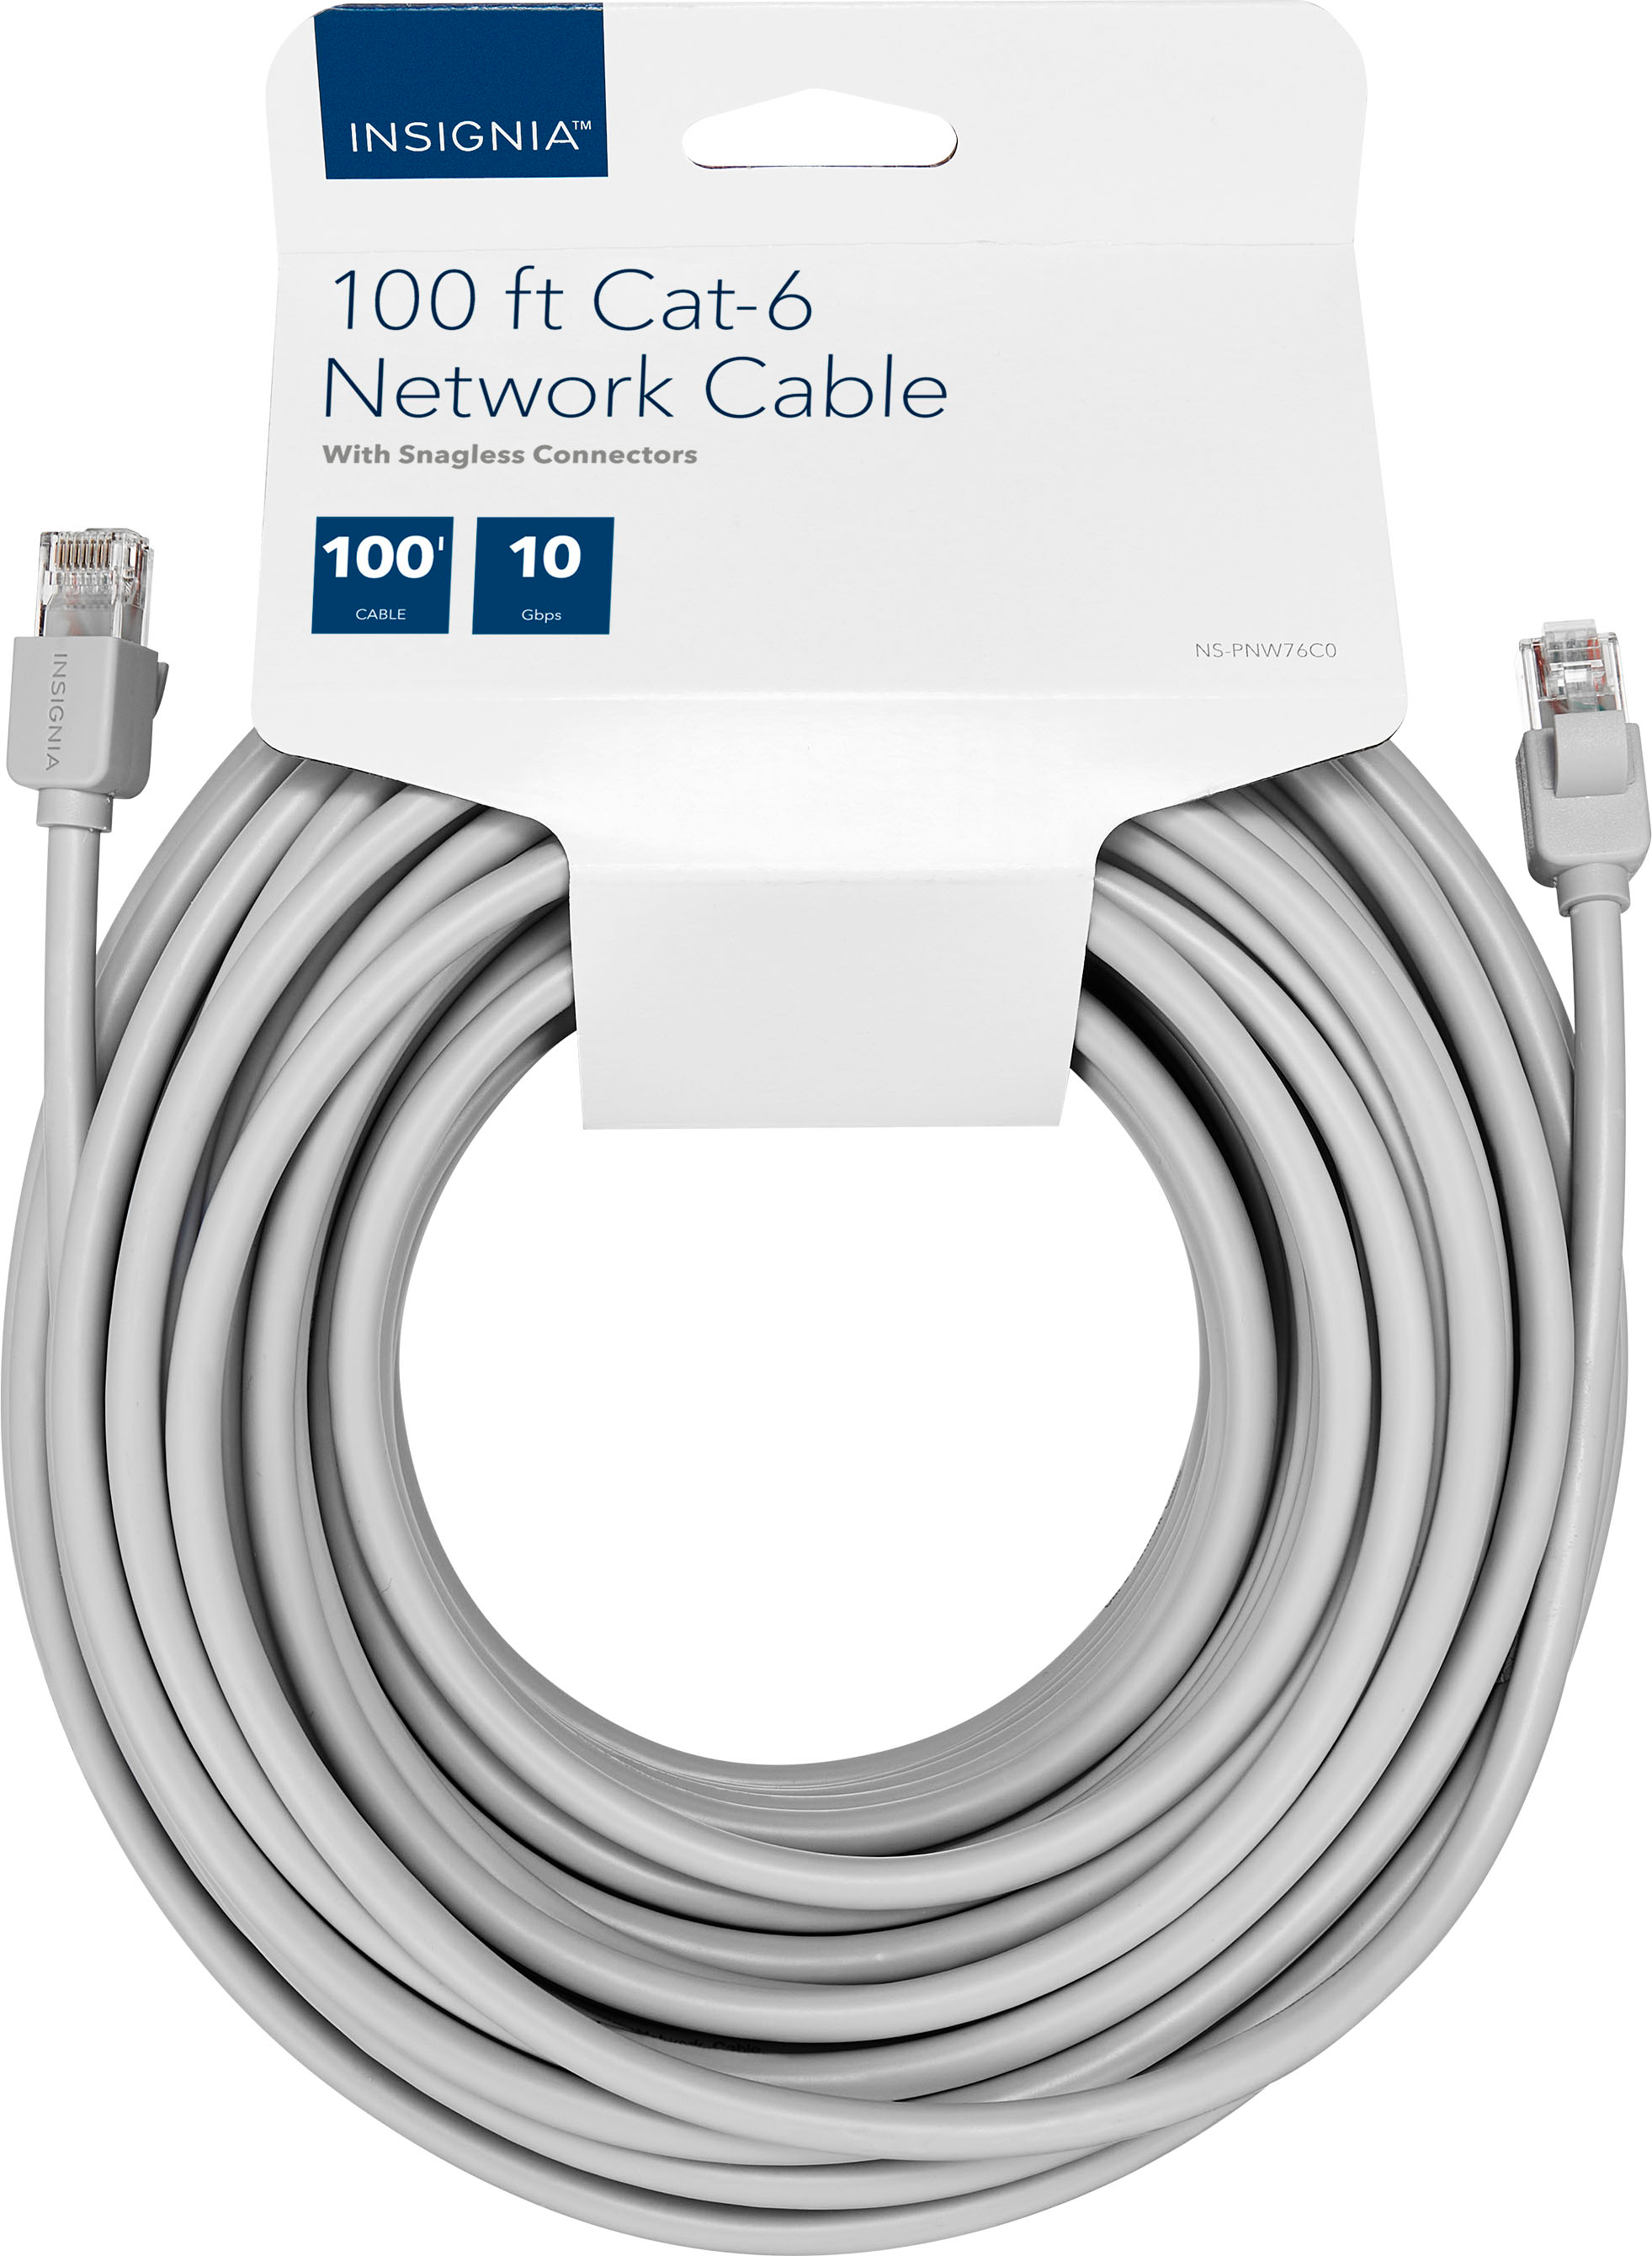 internet cable - Best Buy